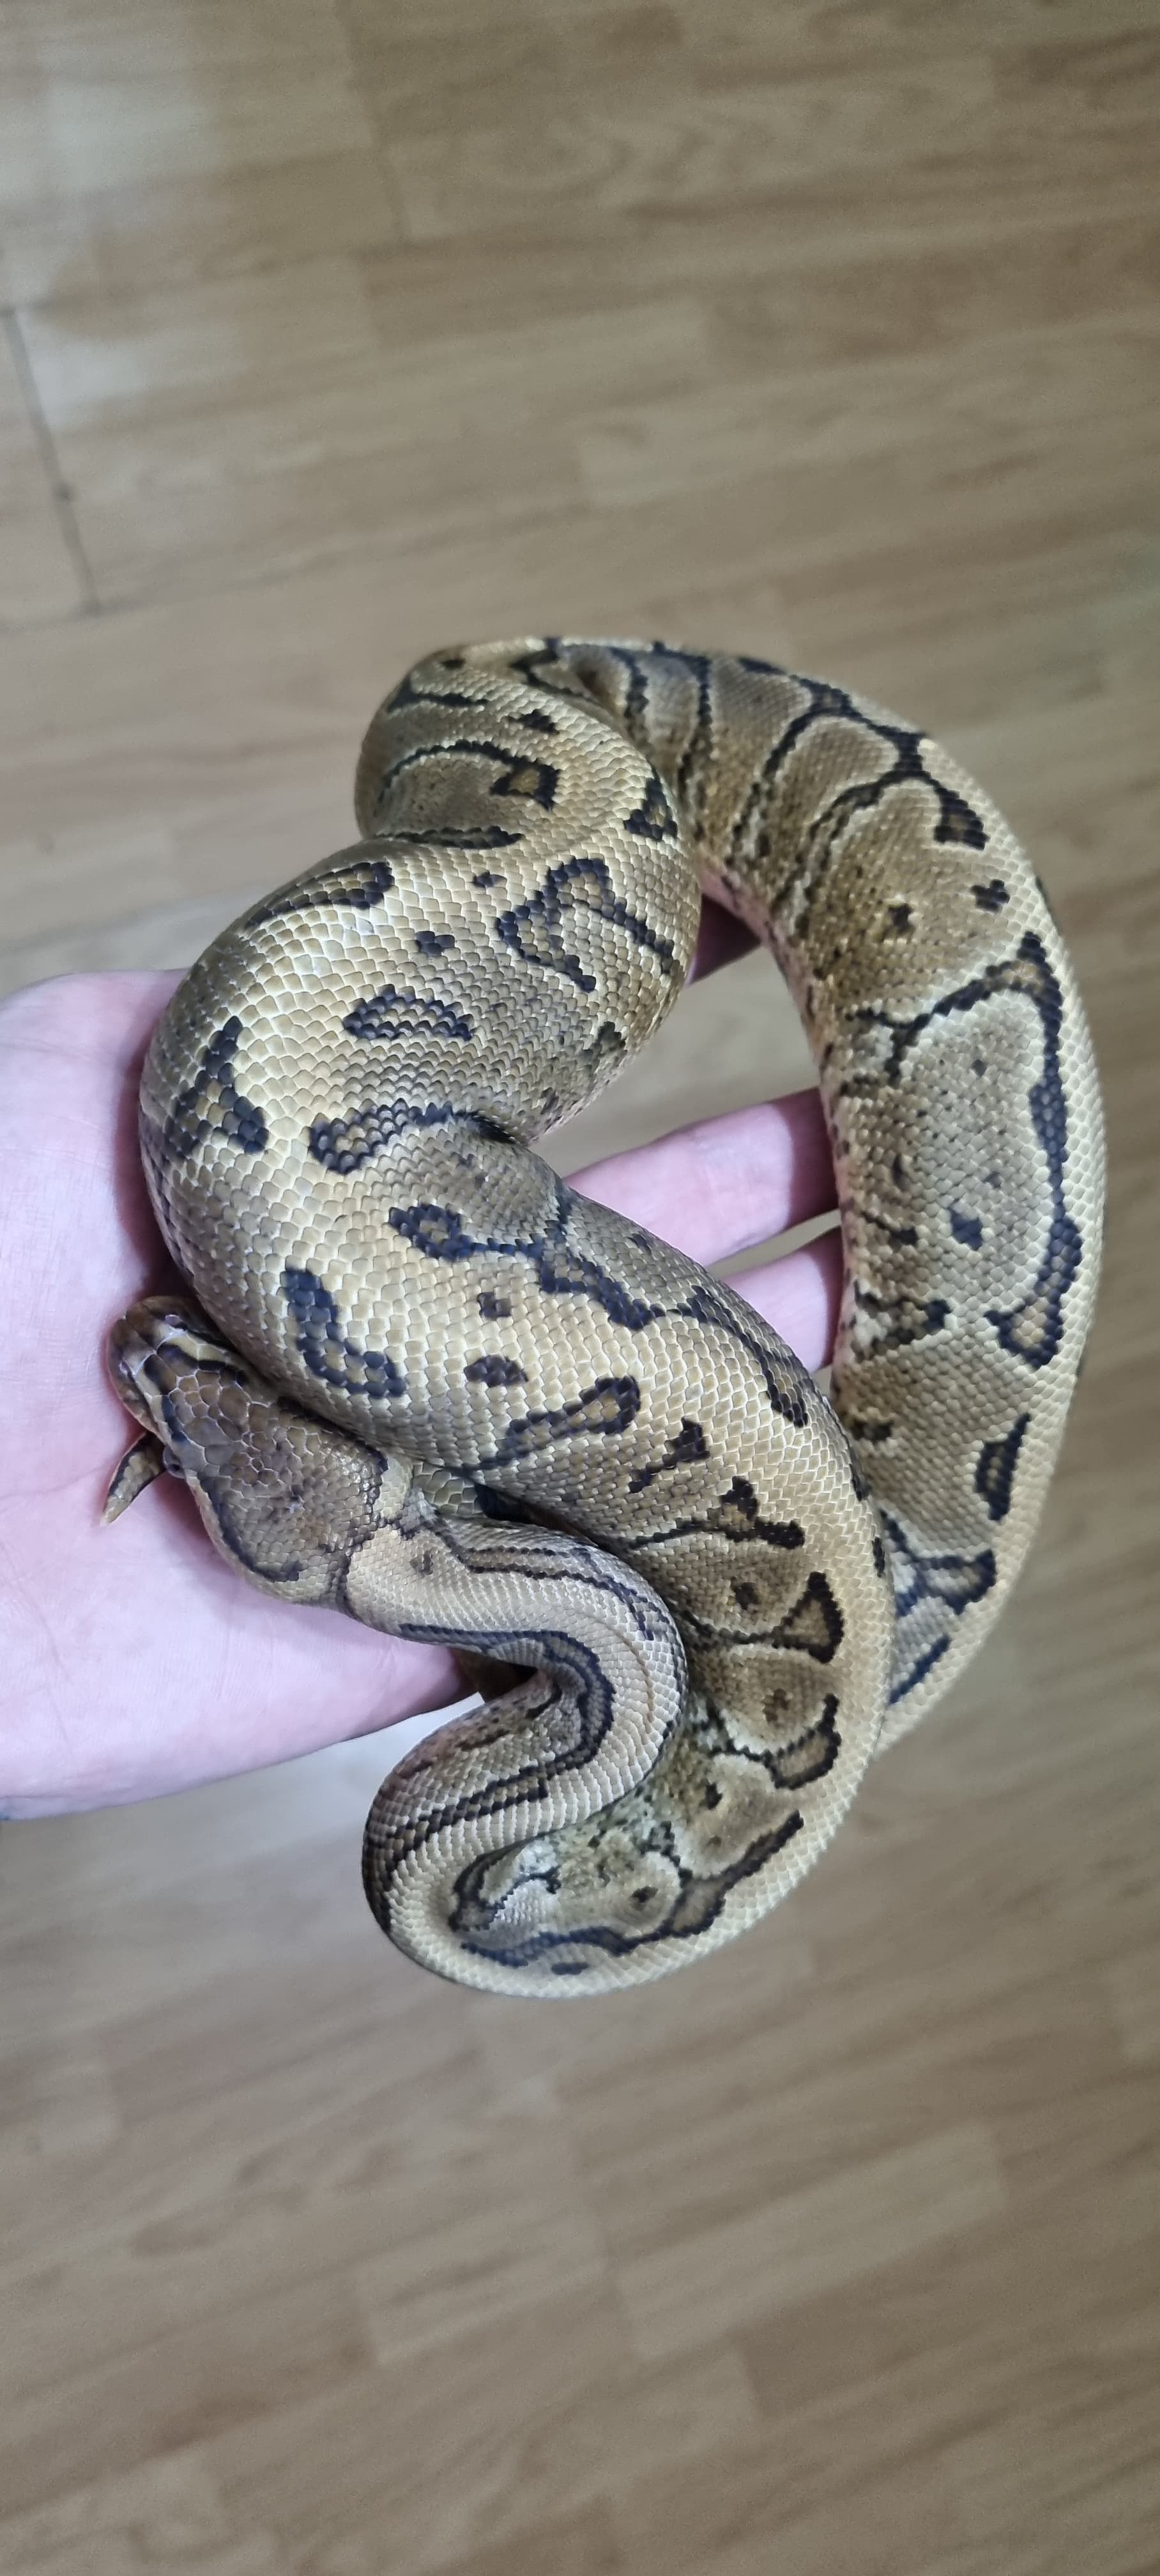 Pinstripe Gravel by Slitheryin Reptiles